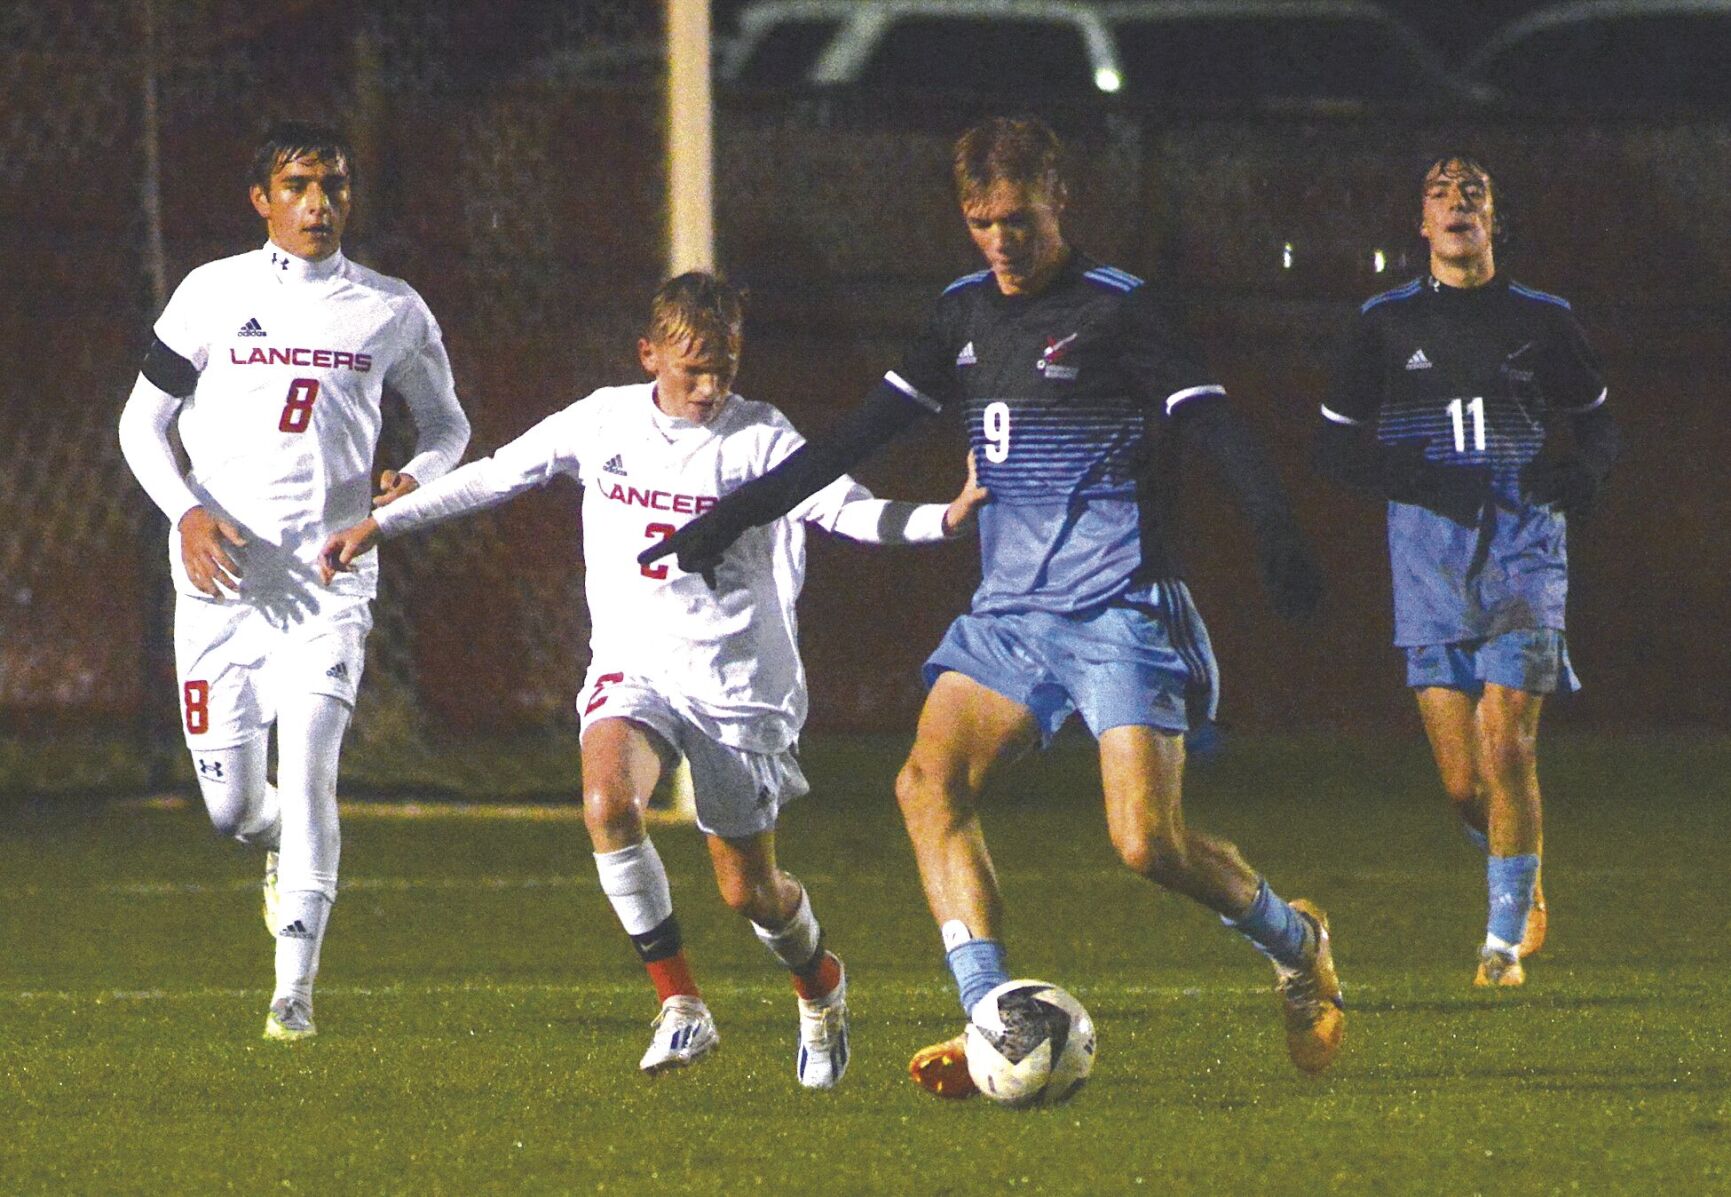 Arrowhead suffers first defeat in boys soccer sectional final against Middleton